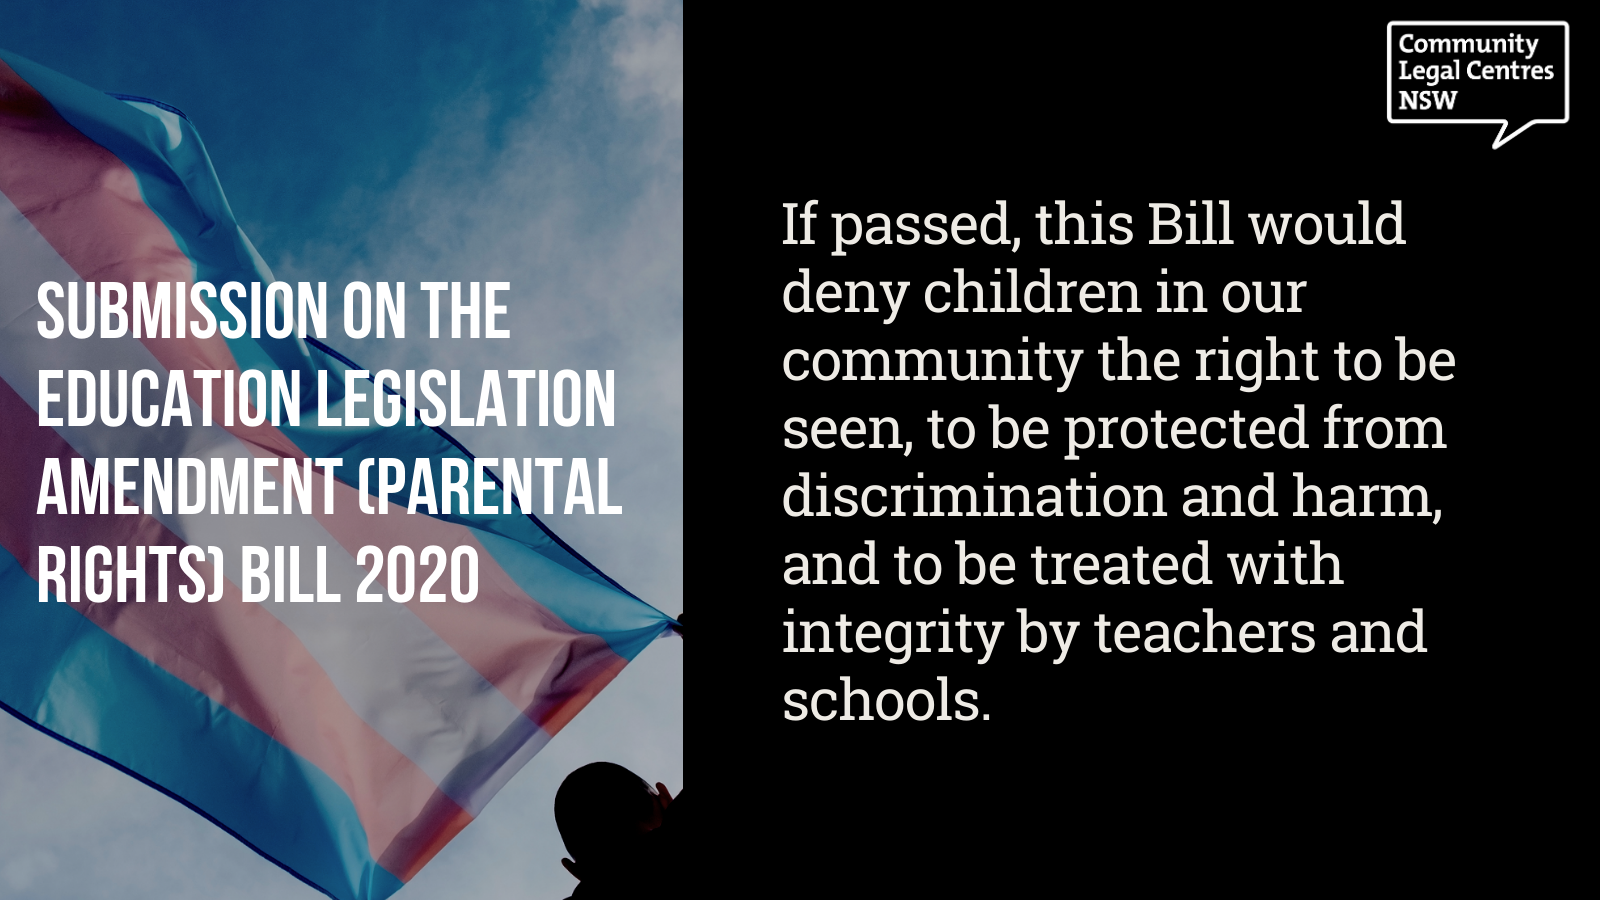 "If passed, this Bill would deny children in our community the right to be seen, to be protected from discrimination and harm, and to be treated with integrity by teachers and schools."